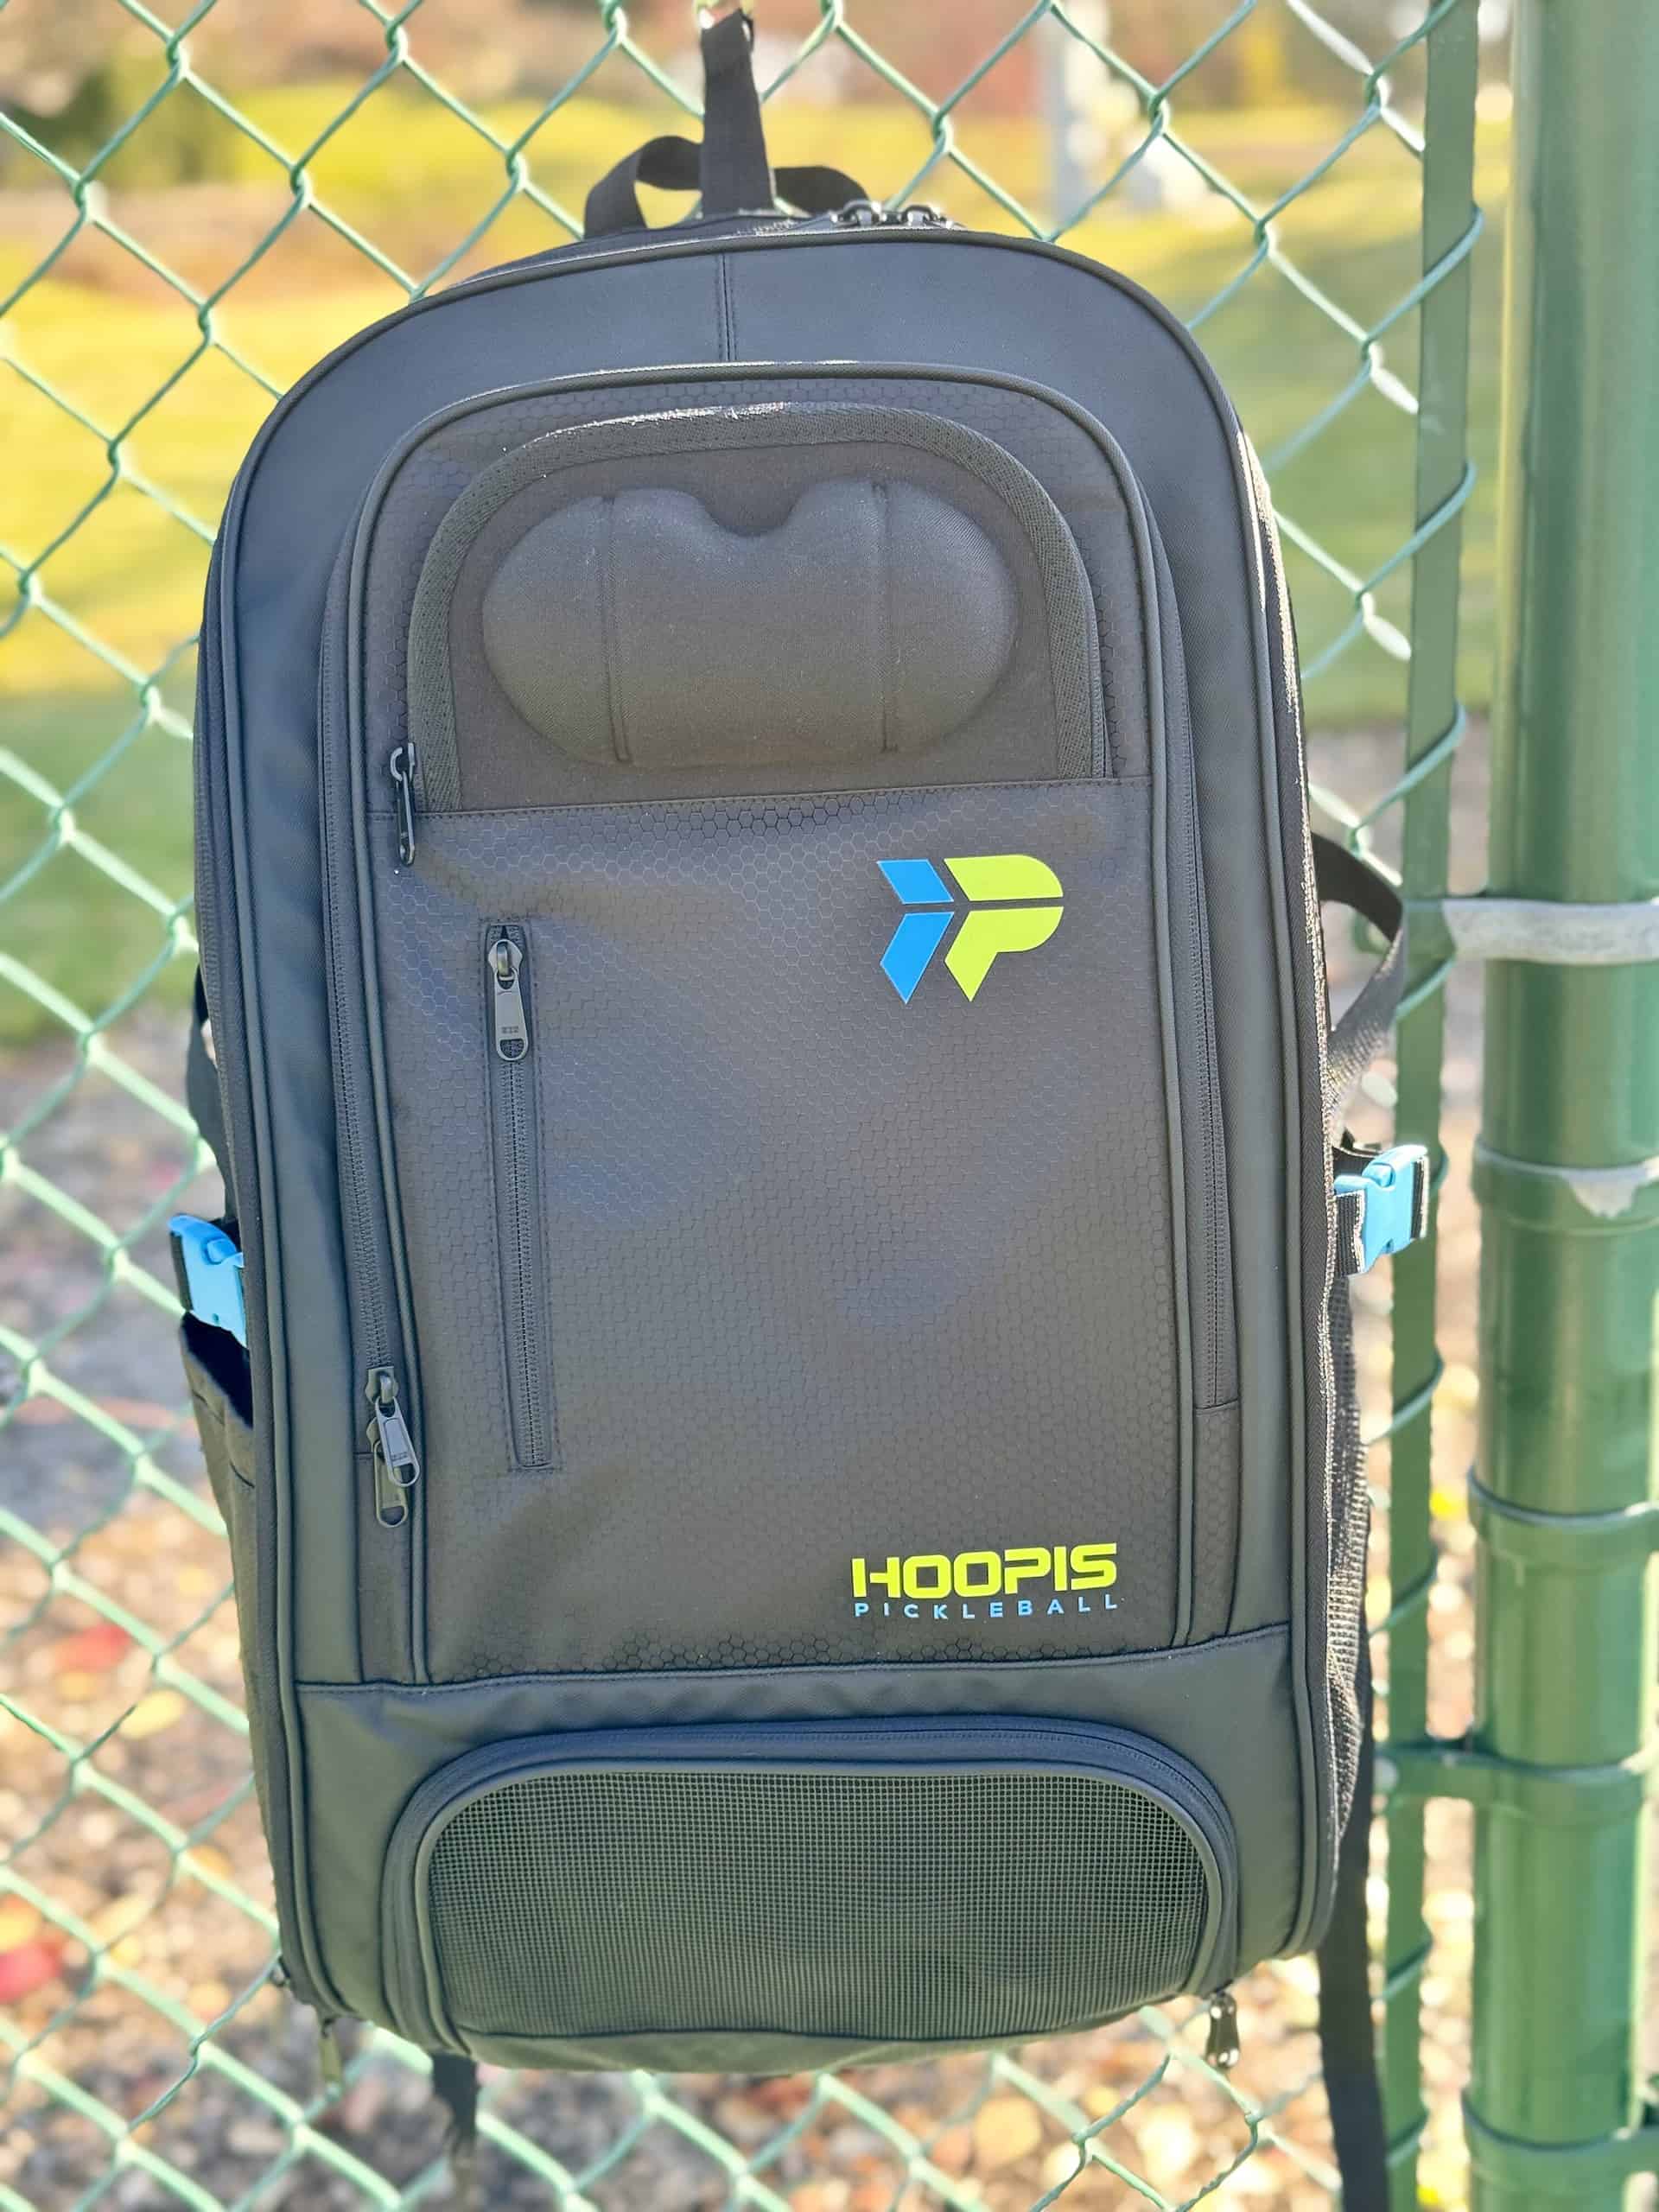 hoopis pickleball backpack with fence hook